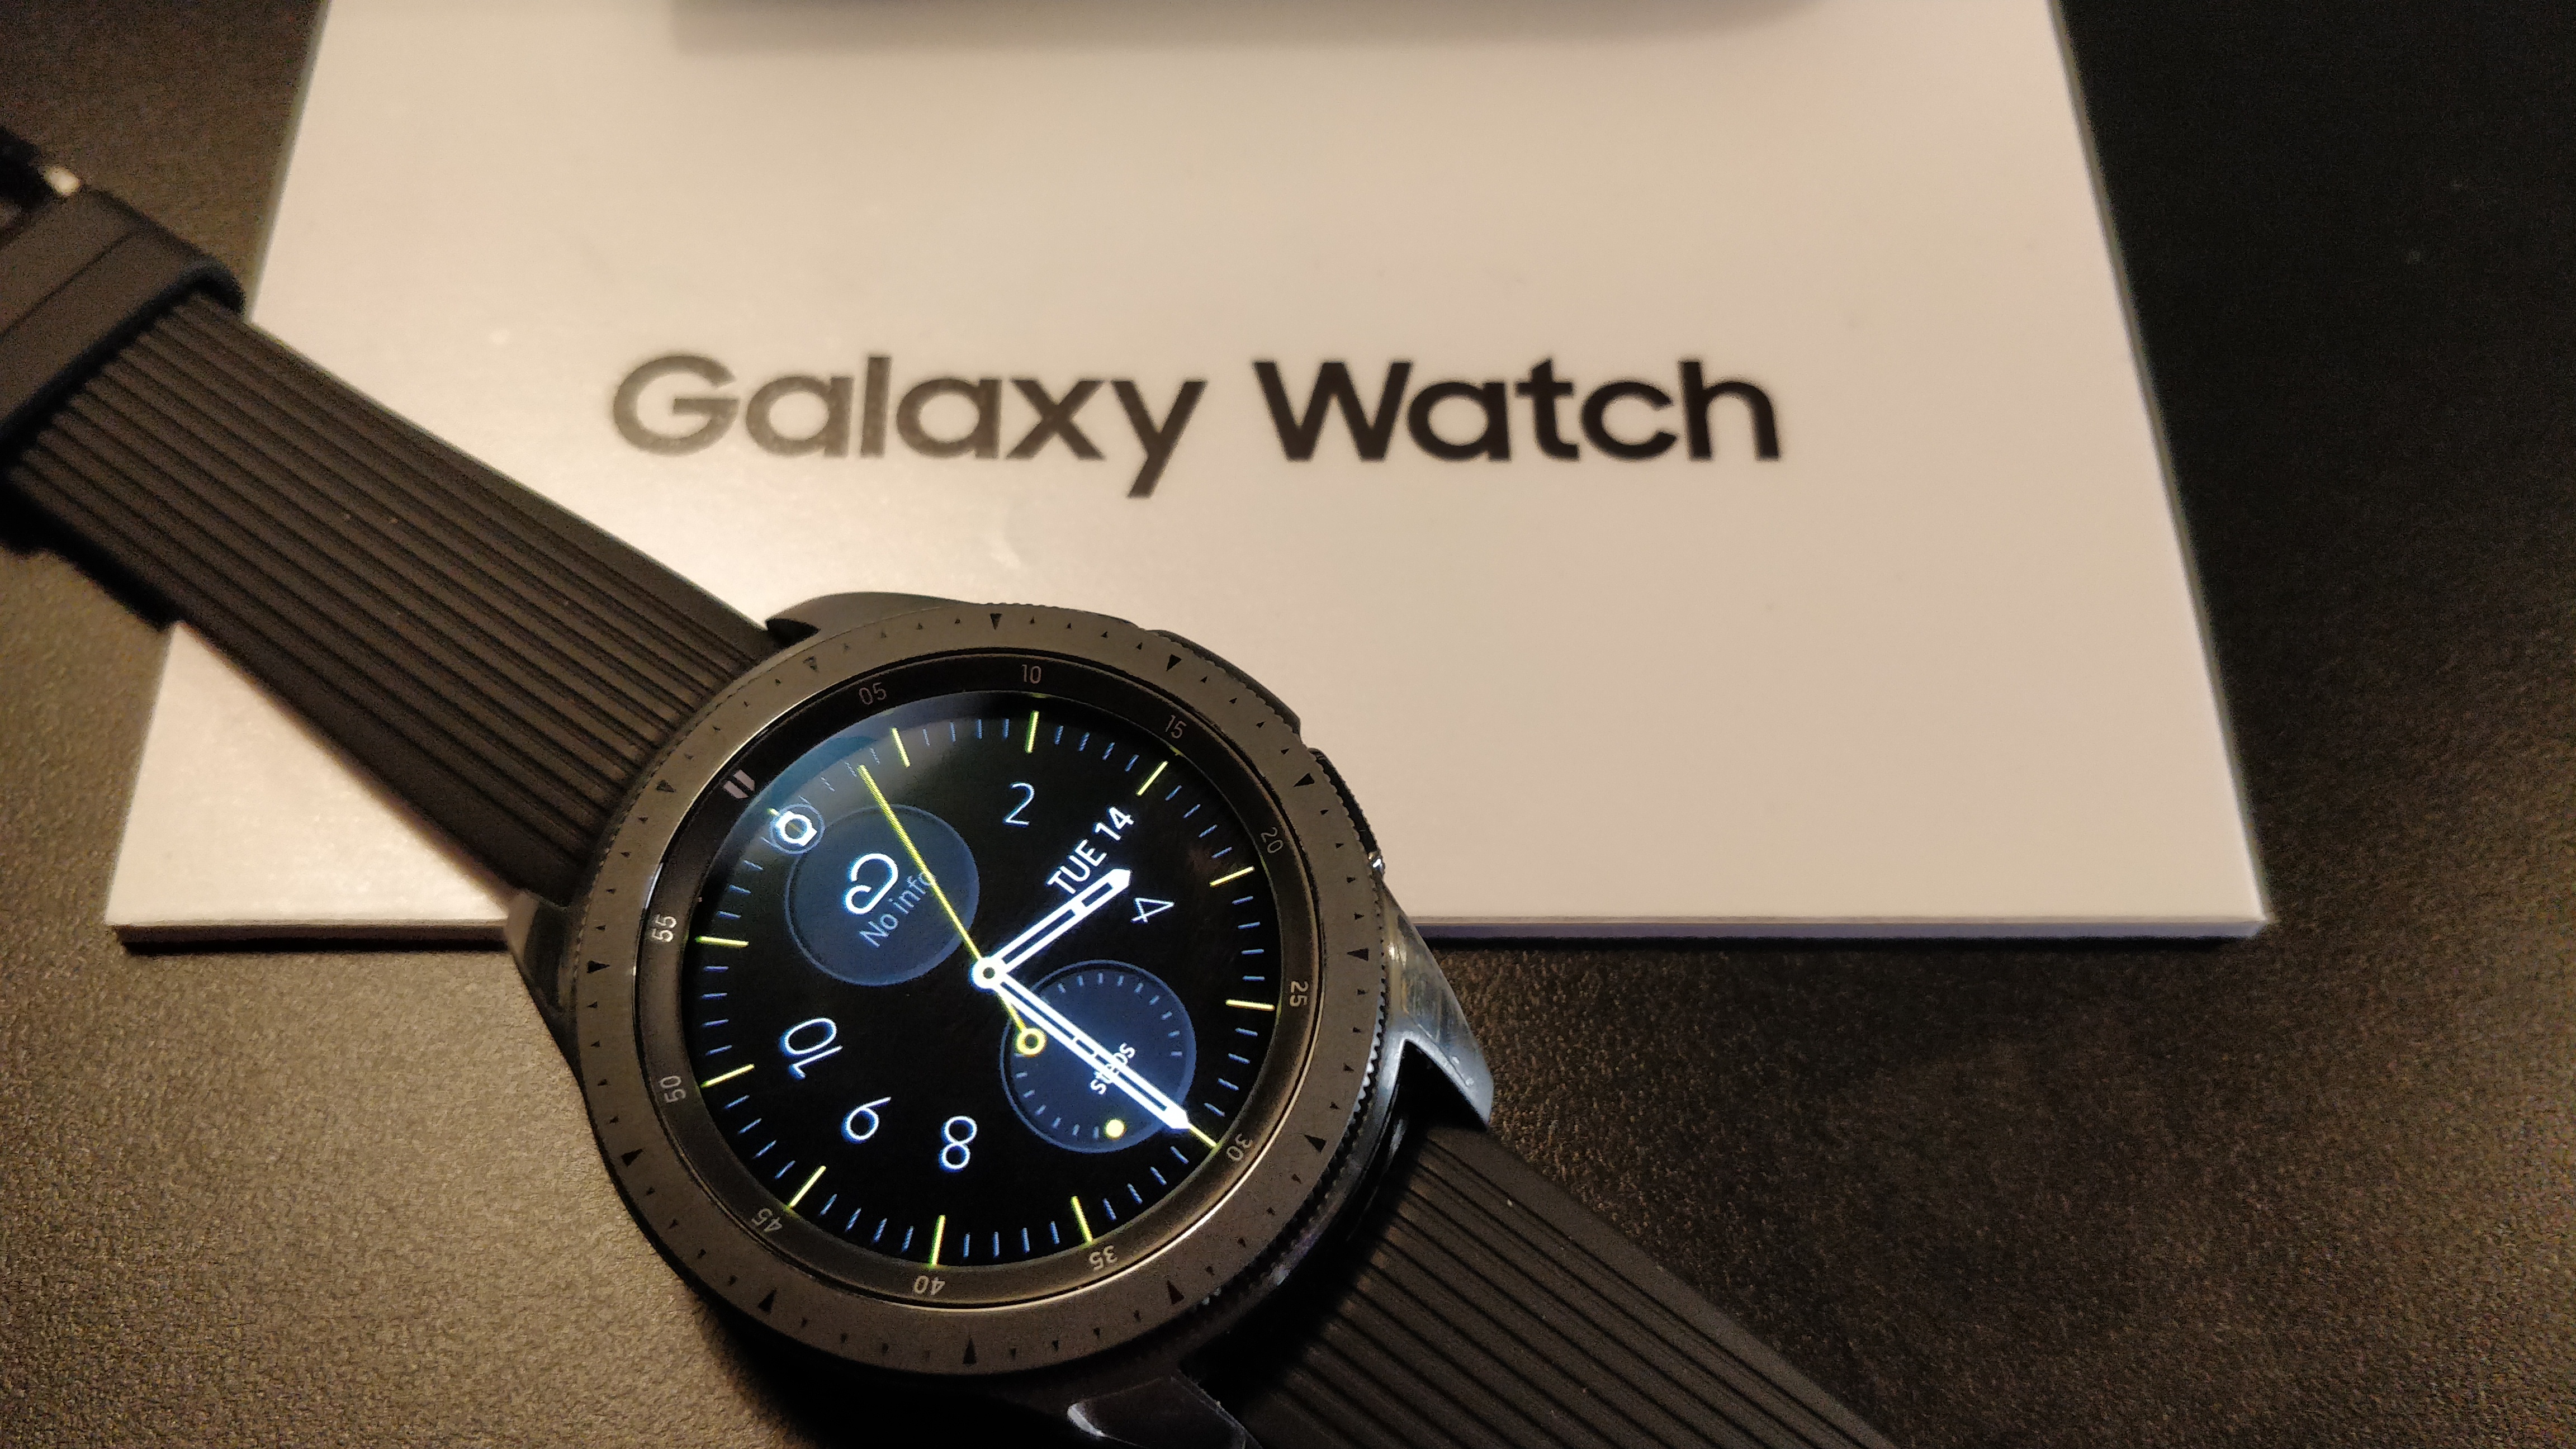 Samsung Galaxy Watch LTE to be Telstra Exclusive